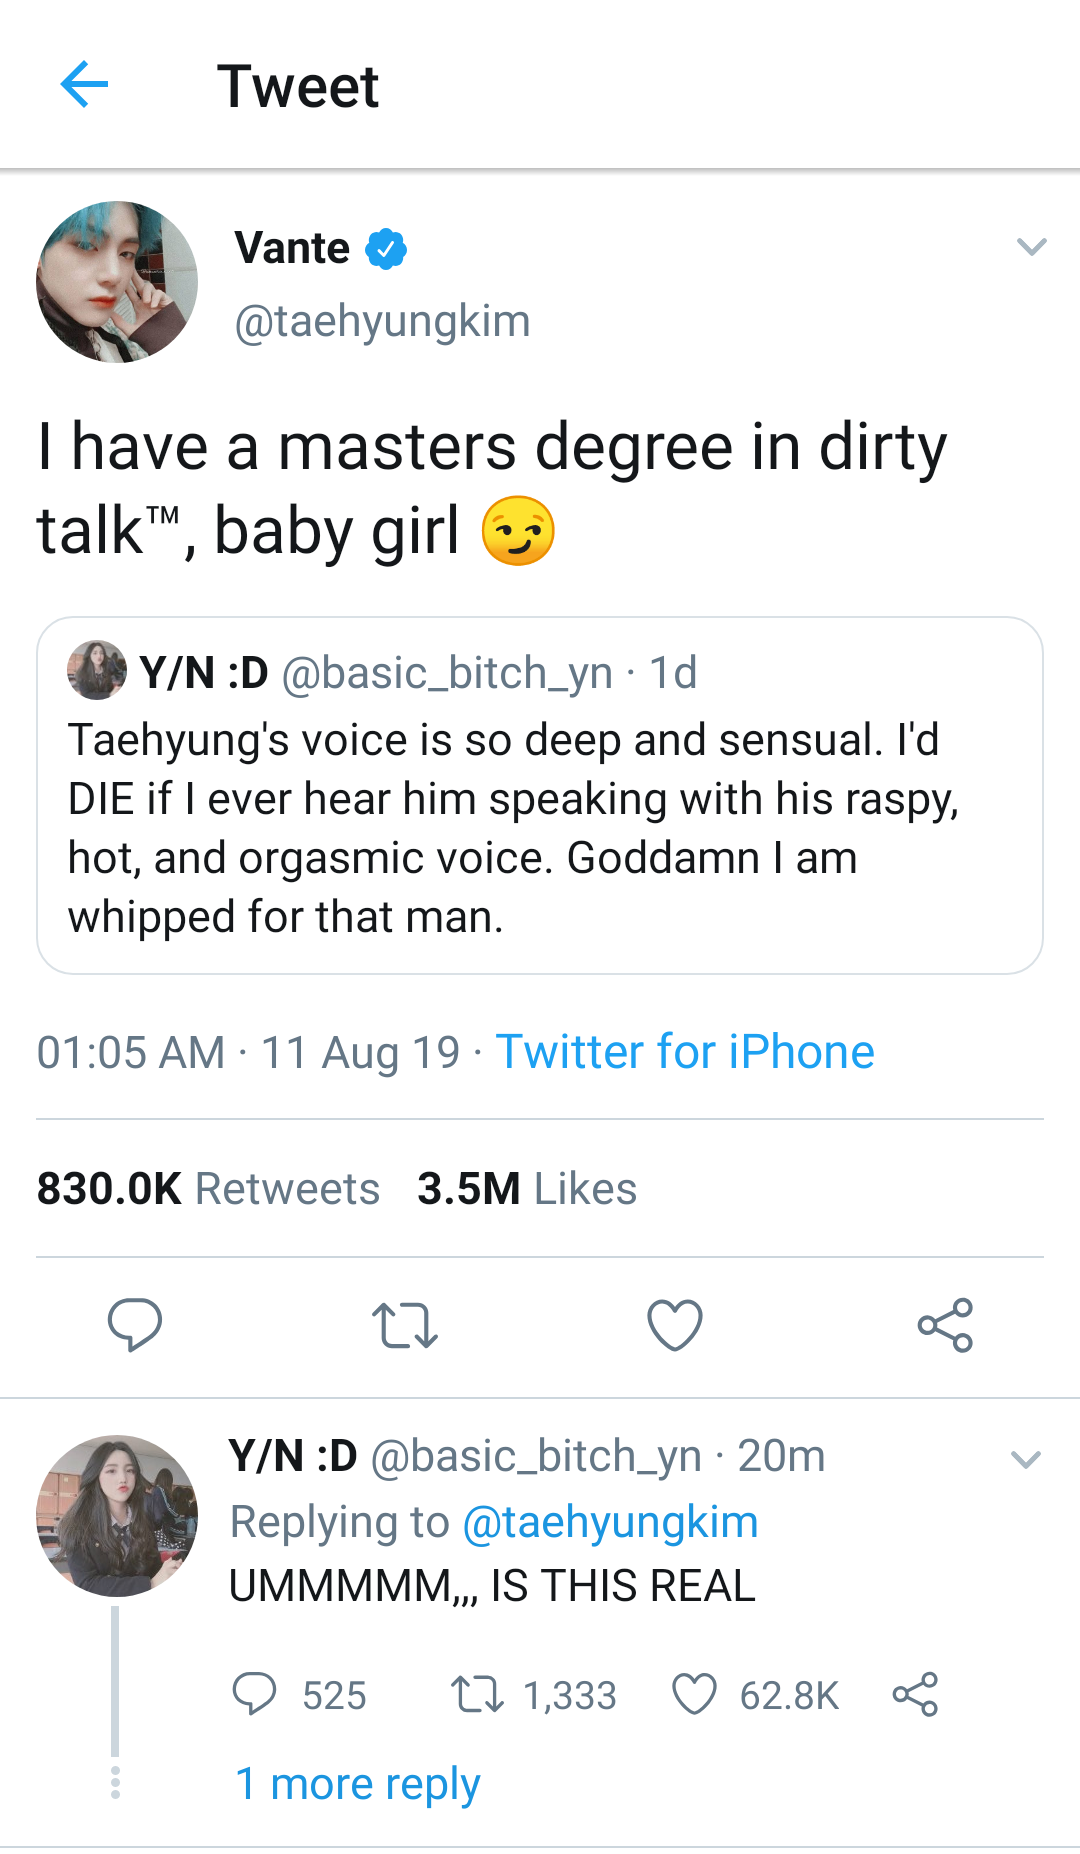 𝖒𝖞 𝖆𝖓𝖌𝖊𝖑, 𝖒𝖞 𝖜𝖔𝖗𝖑𝖉 — bts reaction -> replying to a thirst tweet (2)